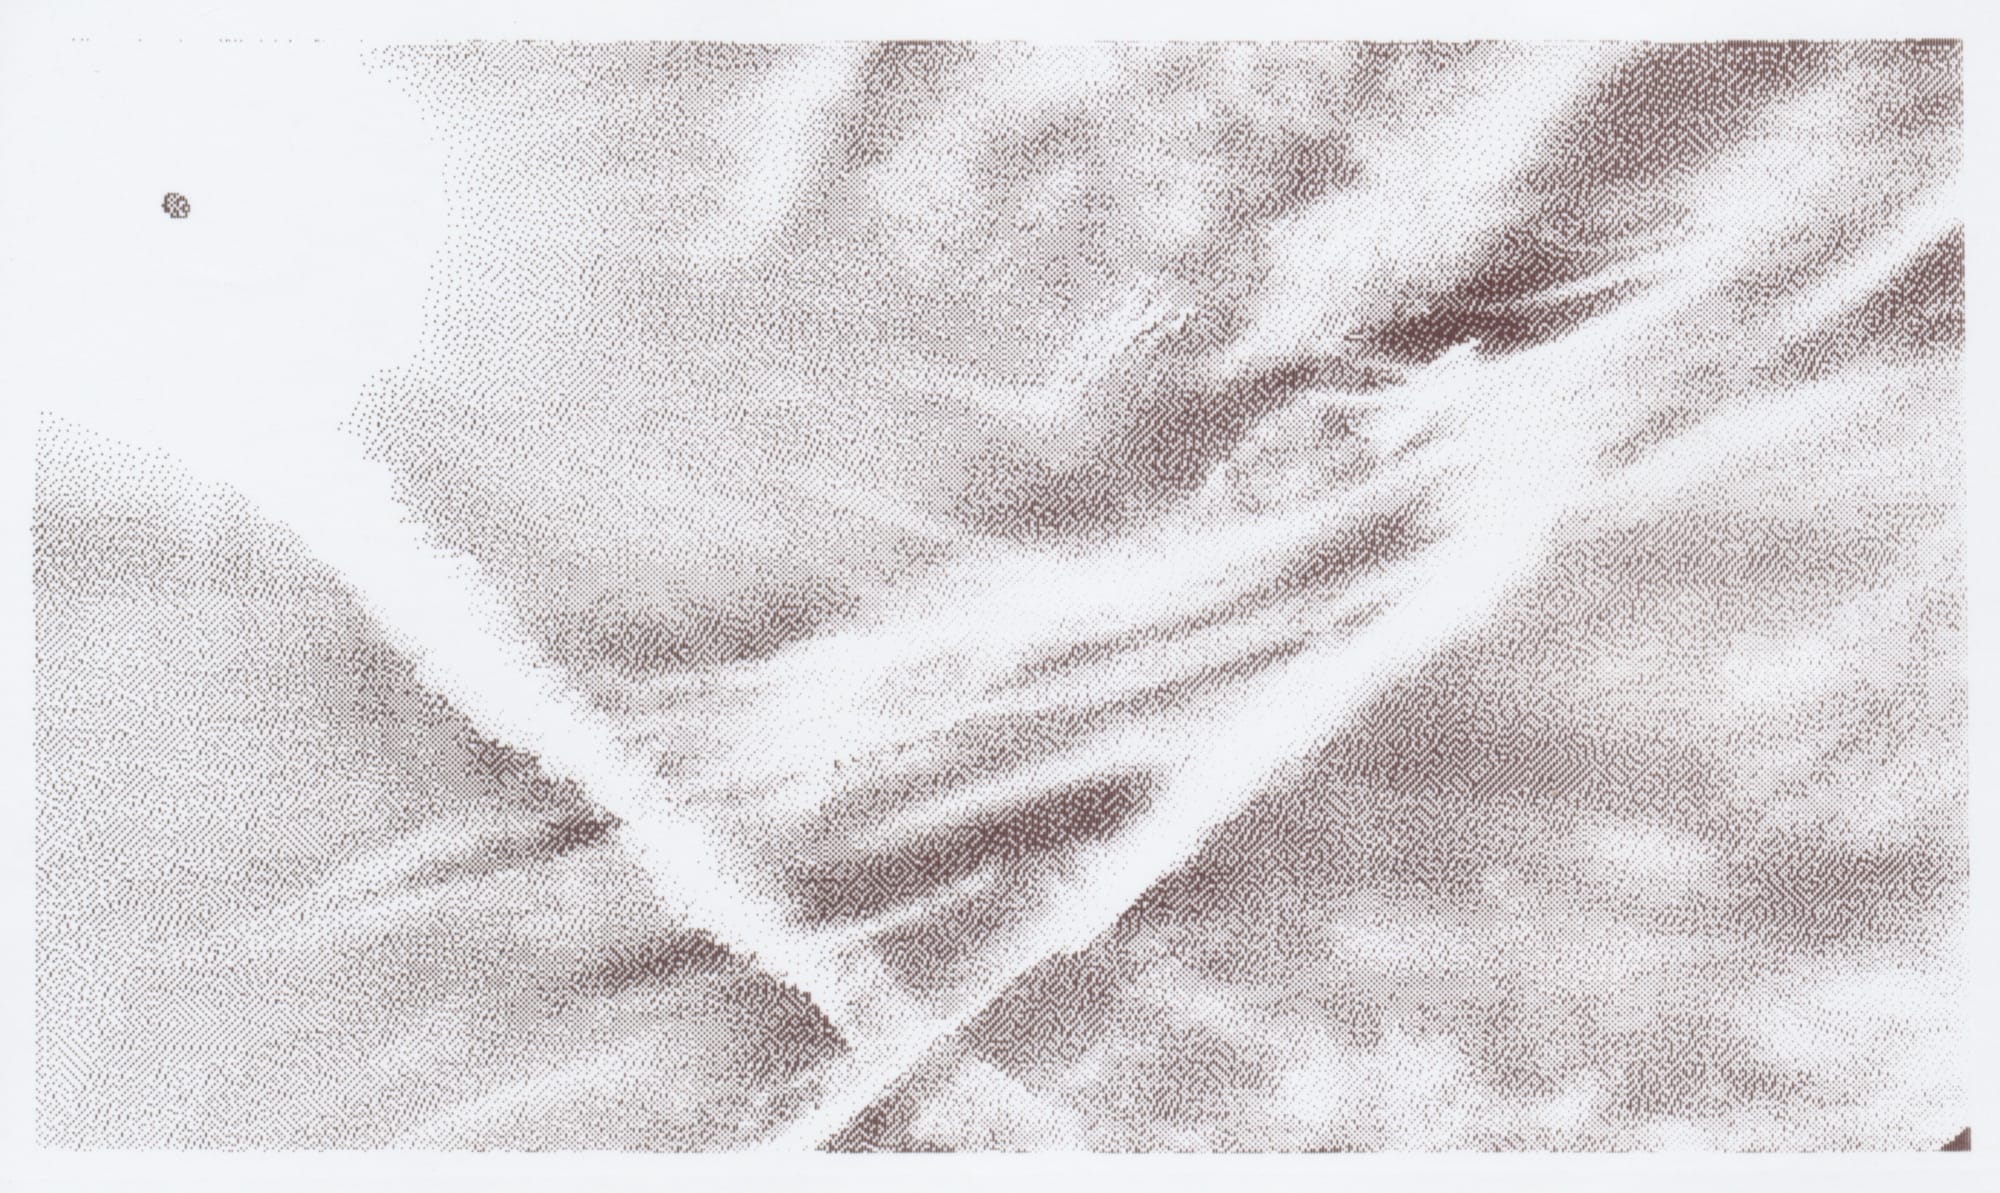 1-bit grayscale thermal print of an image of the sky with the bright sun in the top left corner and criss-crossing wispy clouds in the middle of the frame